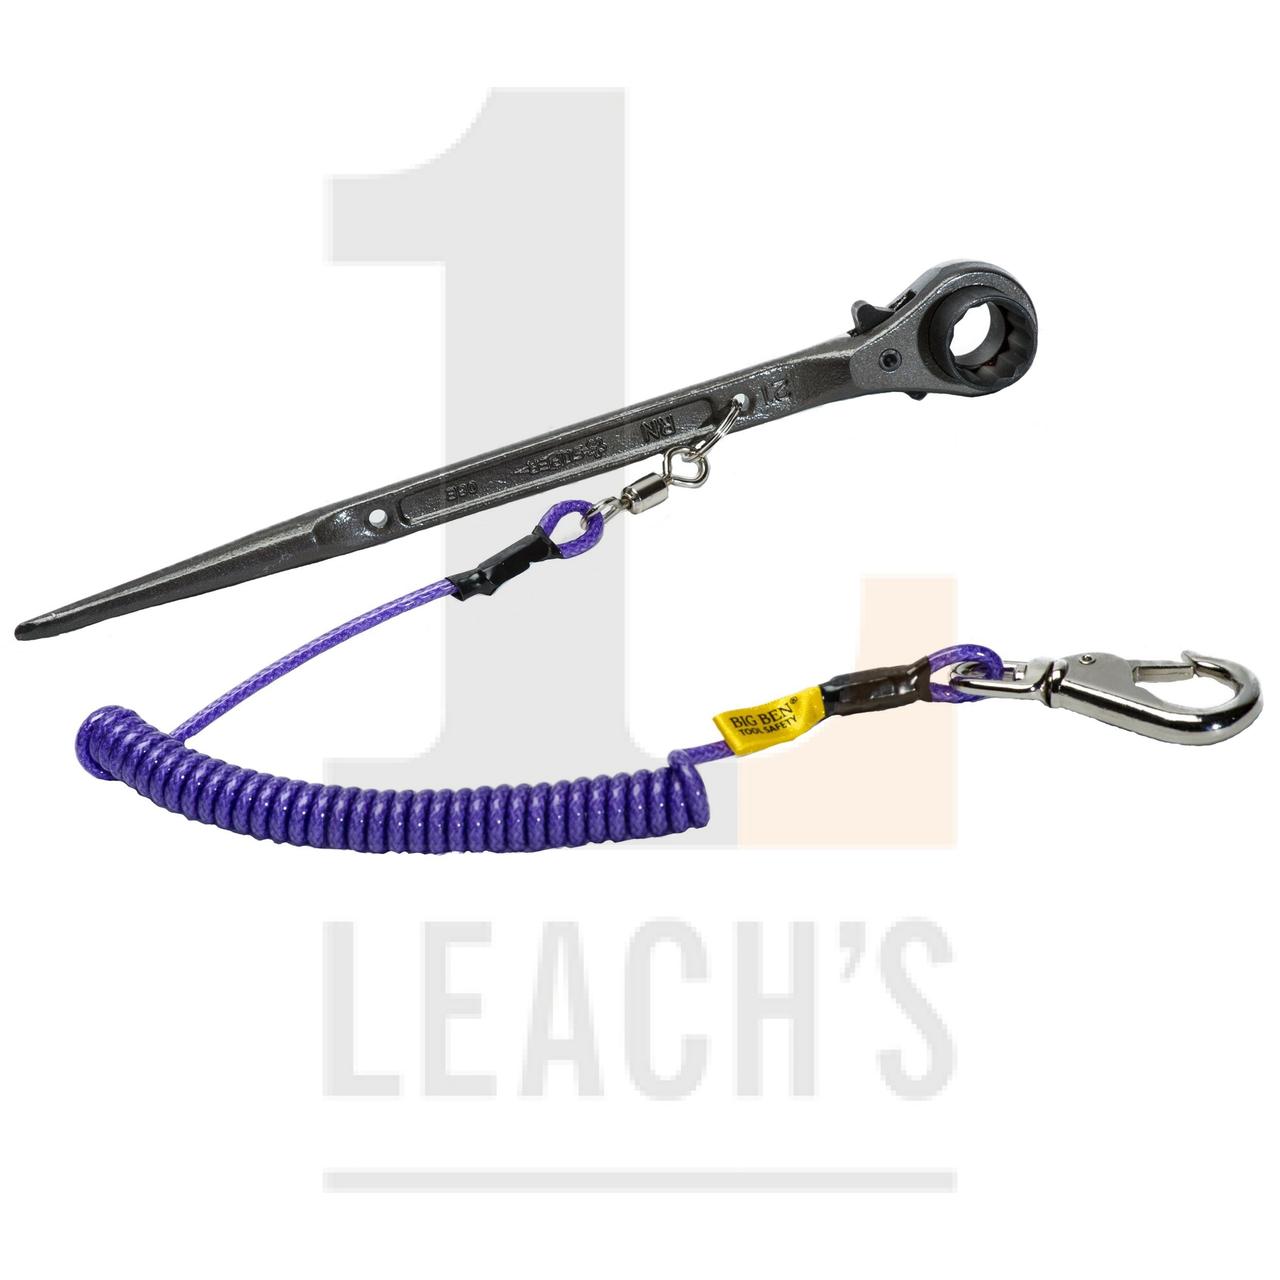 21mm Heavy Duty Podger Ratchet, Box one side c/w HD Tool Safety Rope with Spring Clip / 21мм сверхмощный ключ - фото 2 - id-p105318447